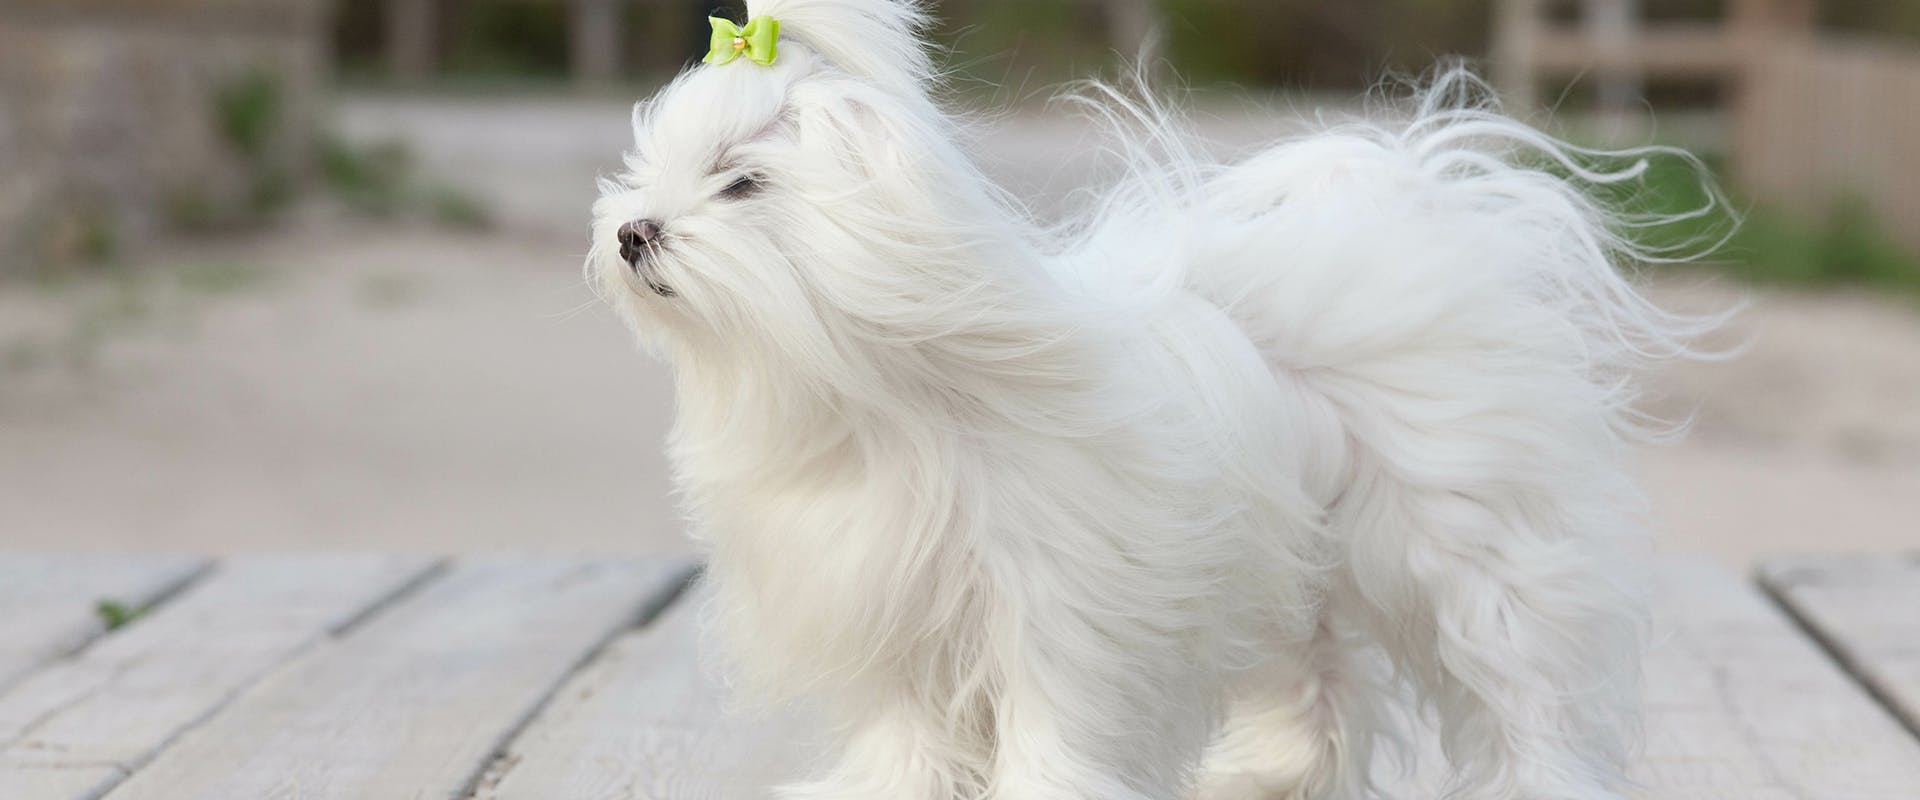 A fluffy white Maltese dog standing outside, the wind blowing through its long fur